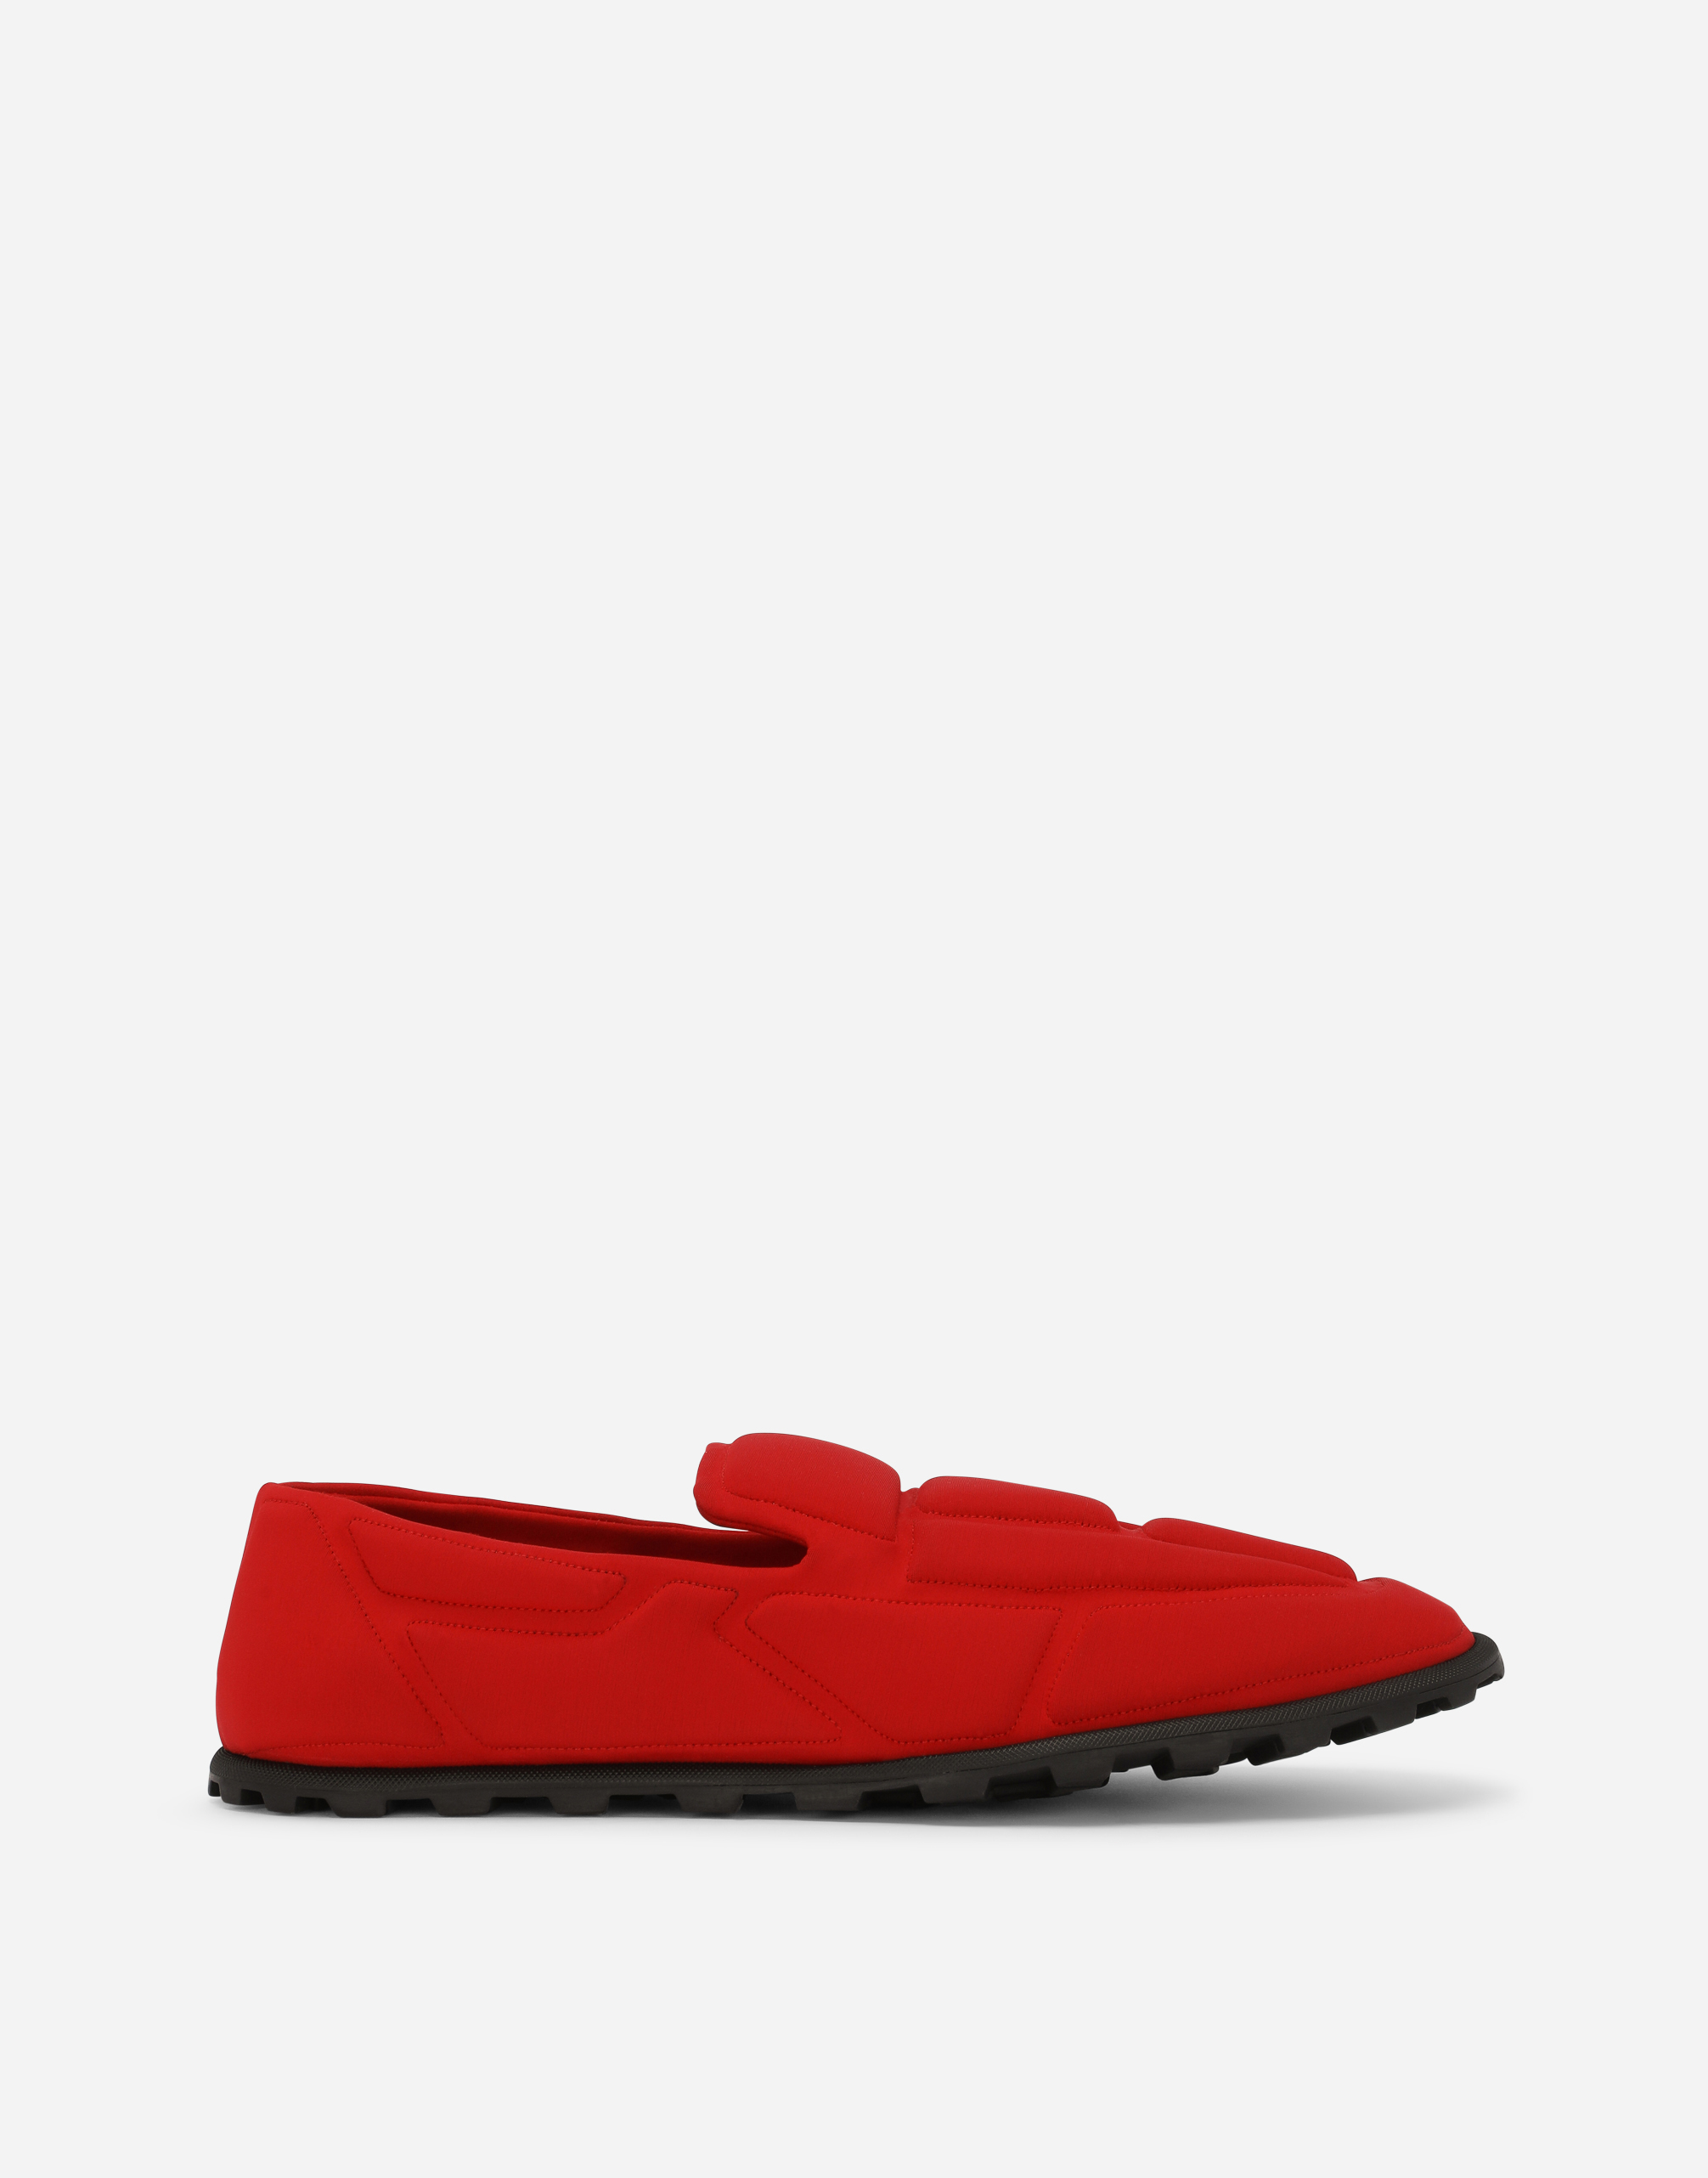 Dolce & Gabbana Spandex Fabric Loafers In Intense Red